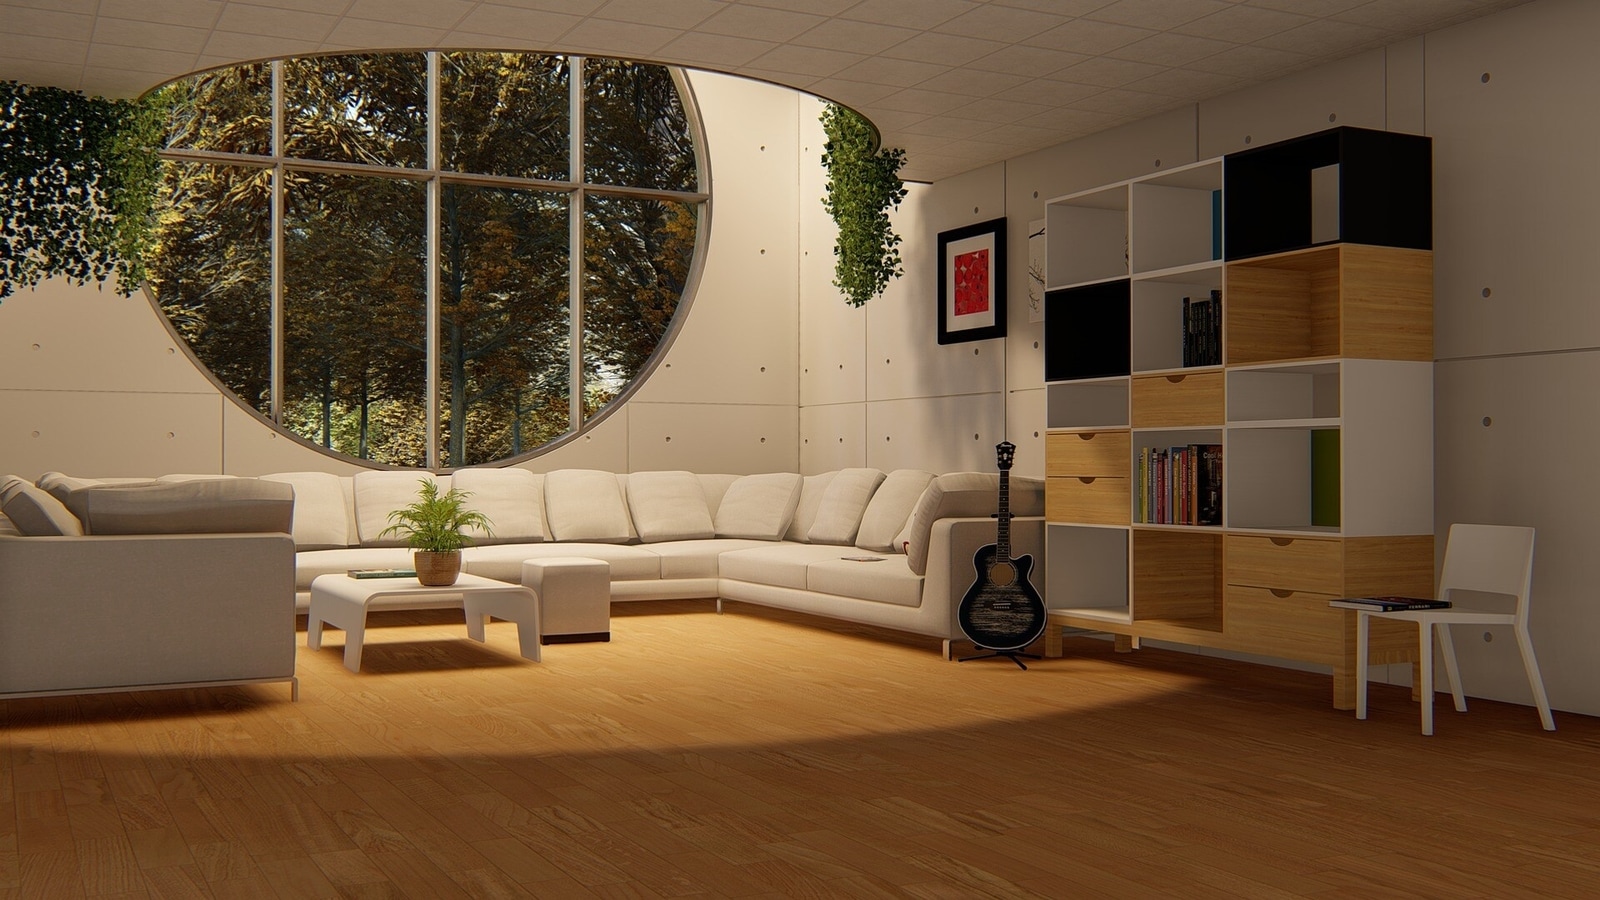 Top 10 Small Living Room Ideas For Your Home